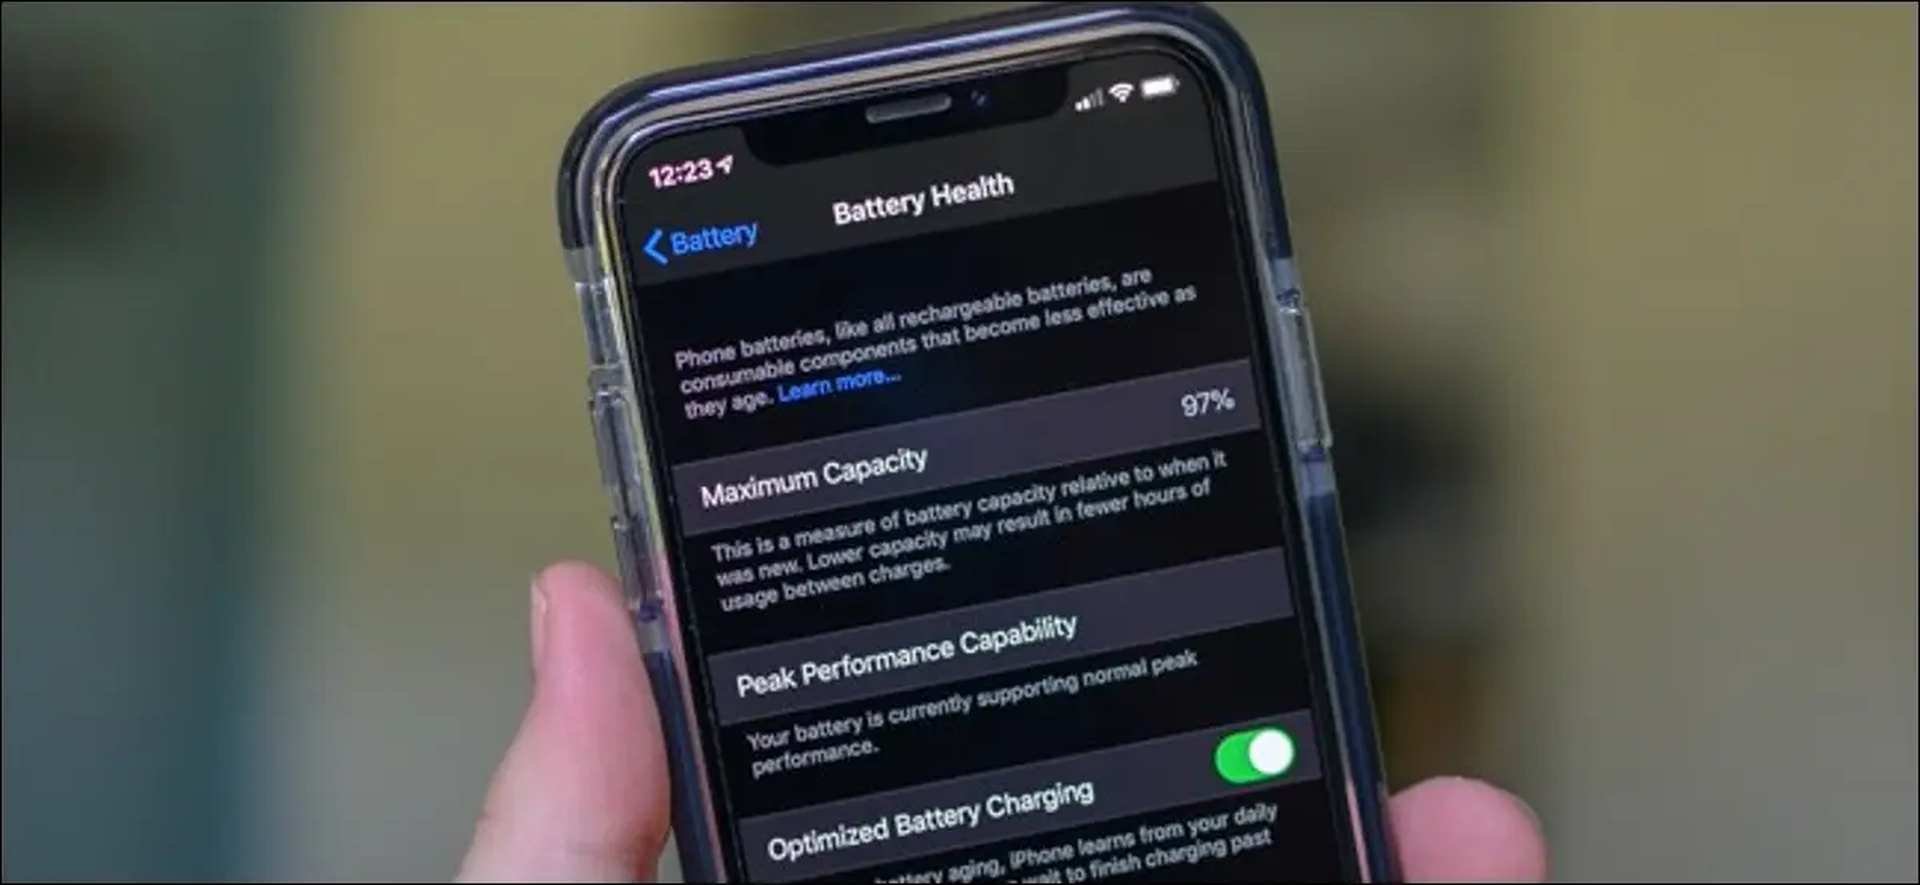 What is Optimized Battery Charging on iPhone?